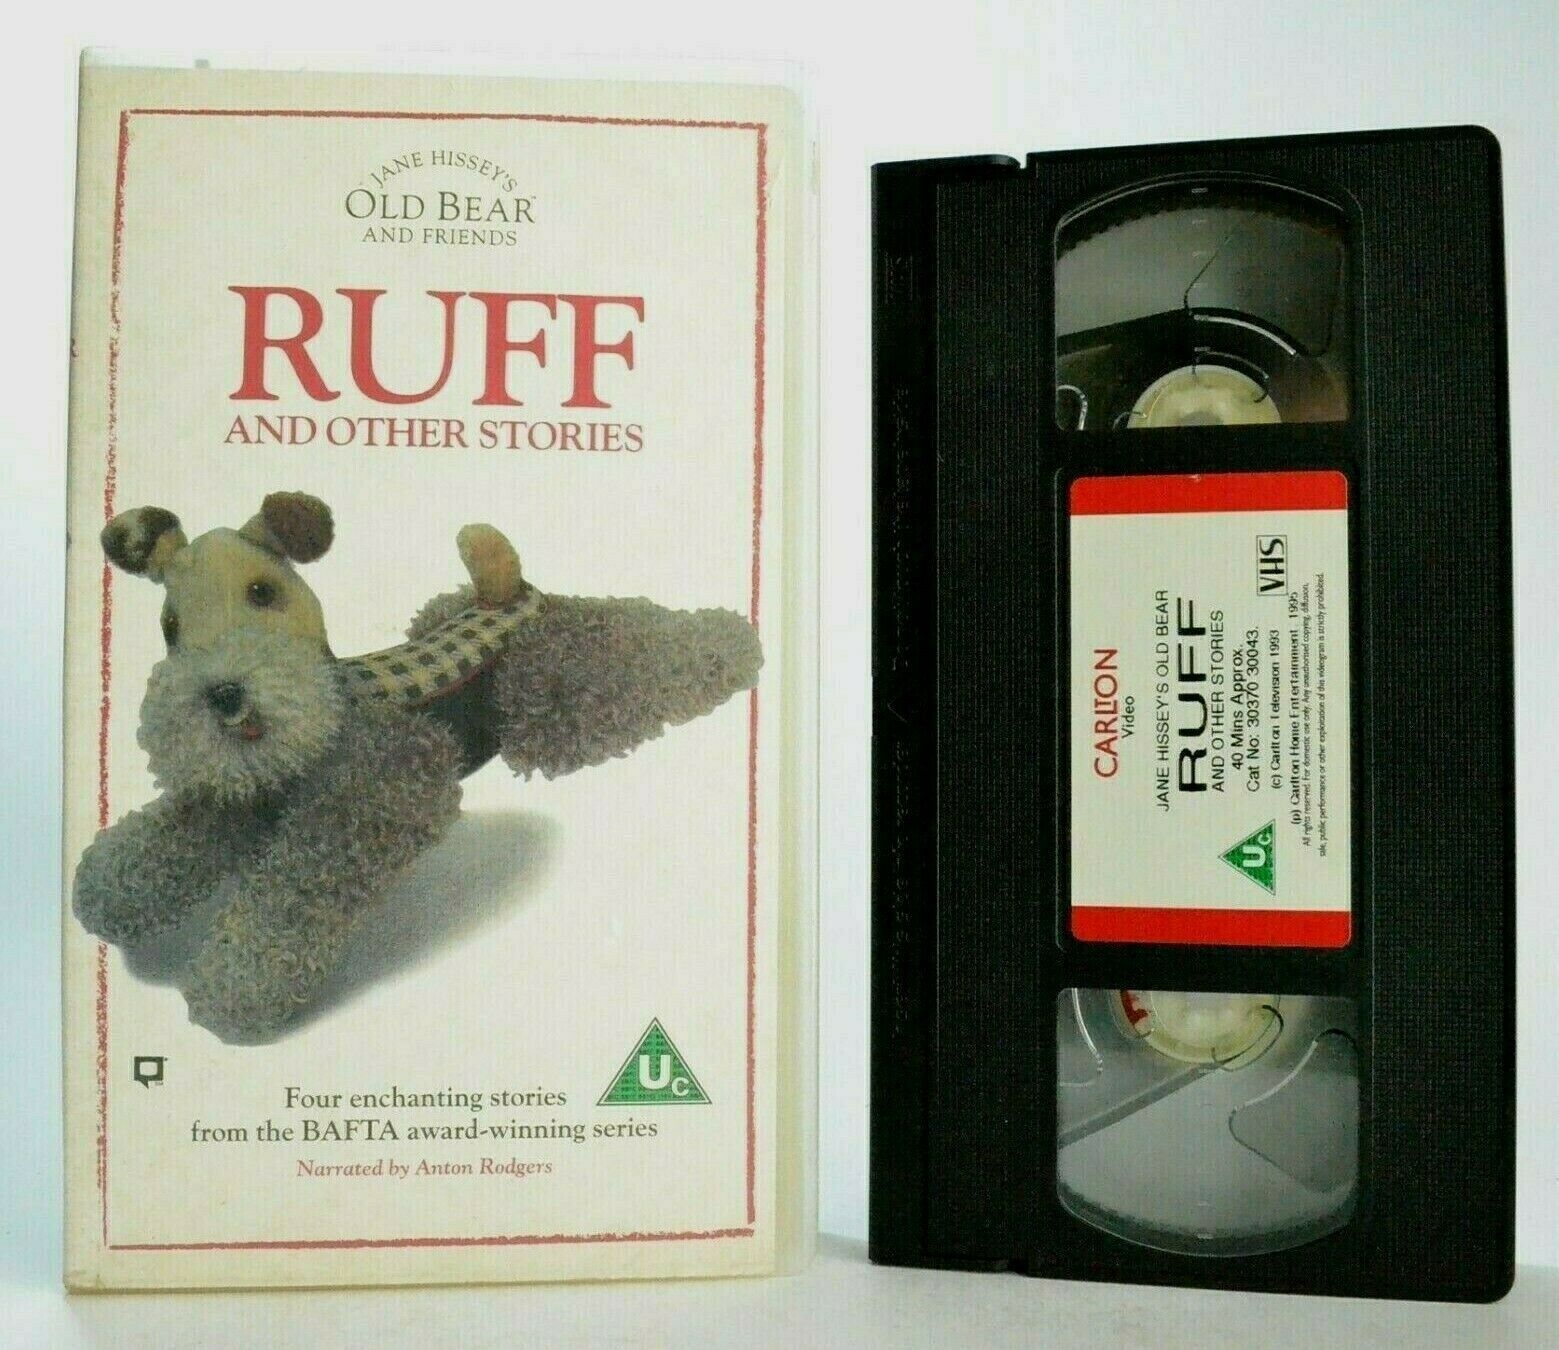 Ruff And Other Stories: By Jane Hissey - Classic Animation - Children's - VHS-